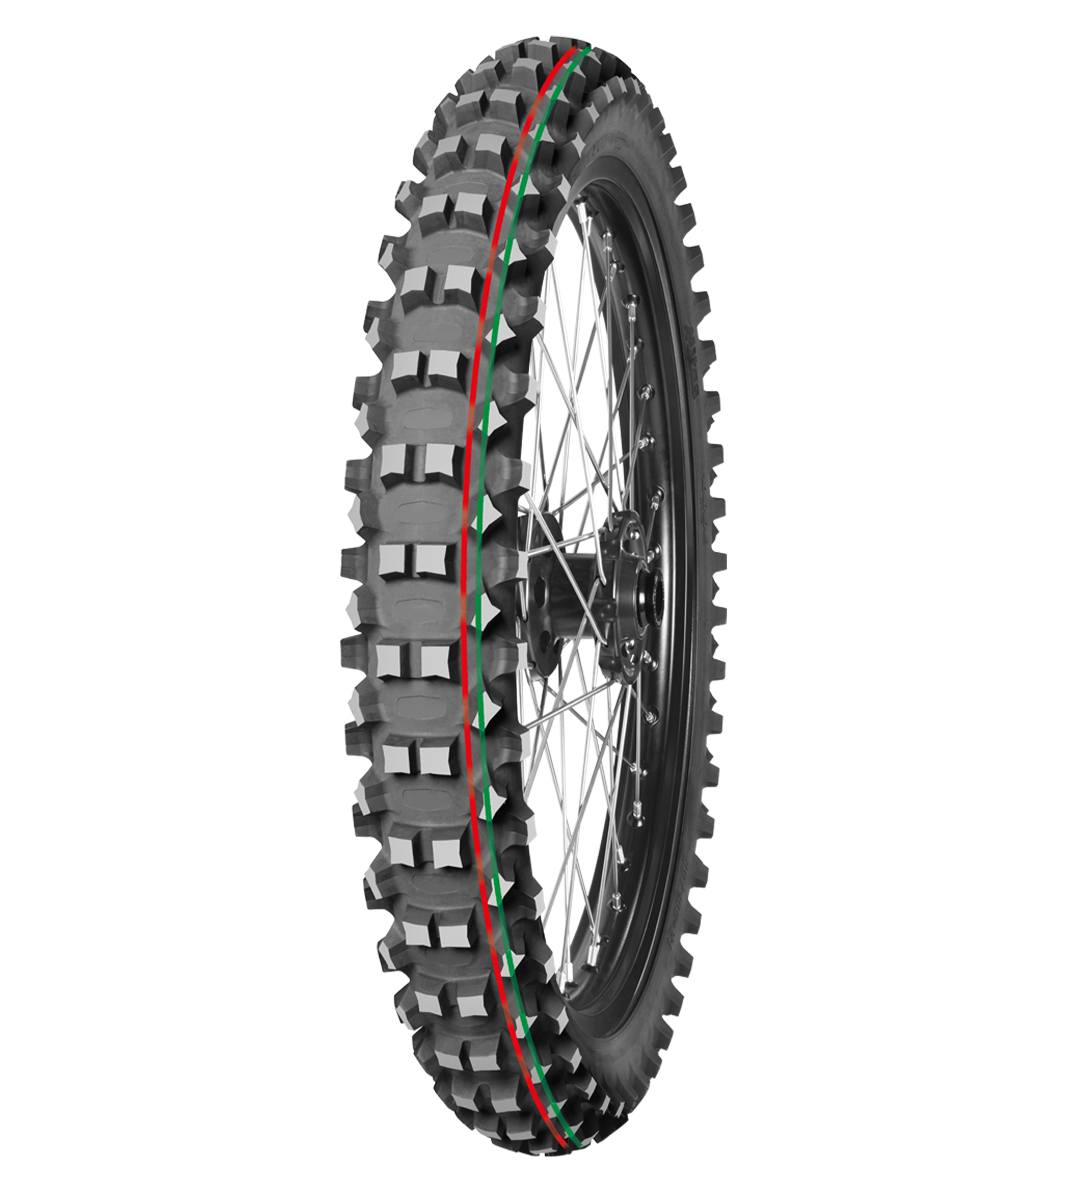 Mitas TERRA FORCE-MX MH 70/100-17 Motocross Competition Off-Road MEDIUM TO HARD 40M Red & Green Tube Front Tire, 226162, 70/100-17, Front, Motocross, Motocross Competition, Off-Road, Terra Force, Terra Force-MX MH, Trail, Tires - Imported and distributed in North & South America by Lindeco Genuine Powersports - Premier Powersports Equipment and Accessories for Motorcycle Enthusiasts, Professional Riders and Dealers.